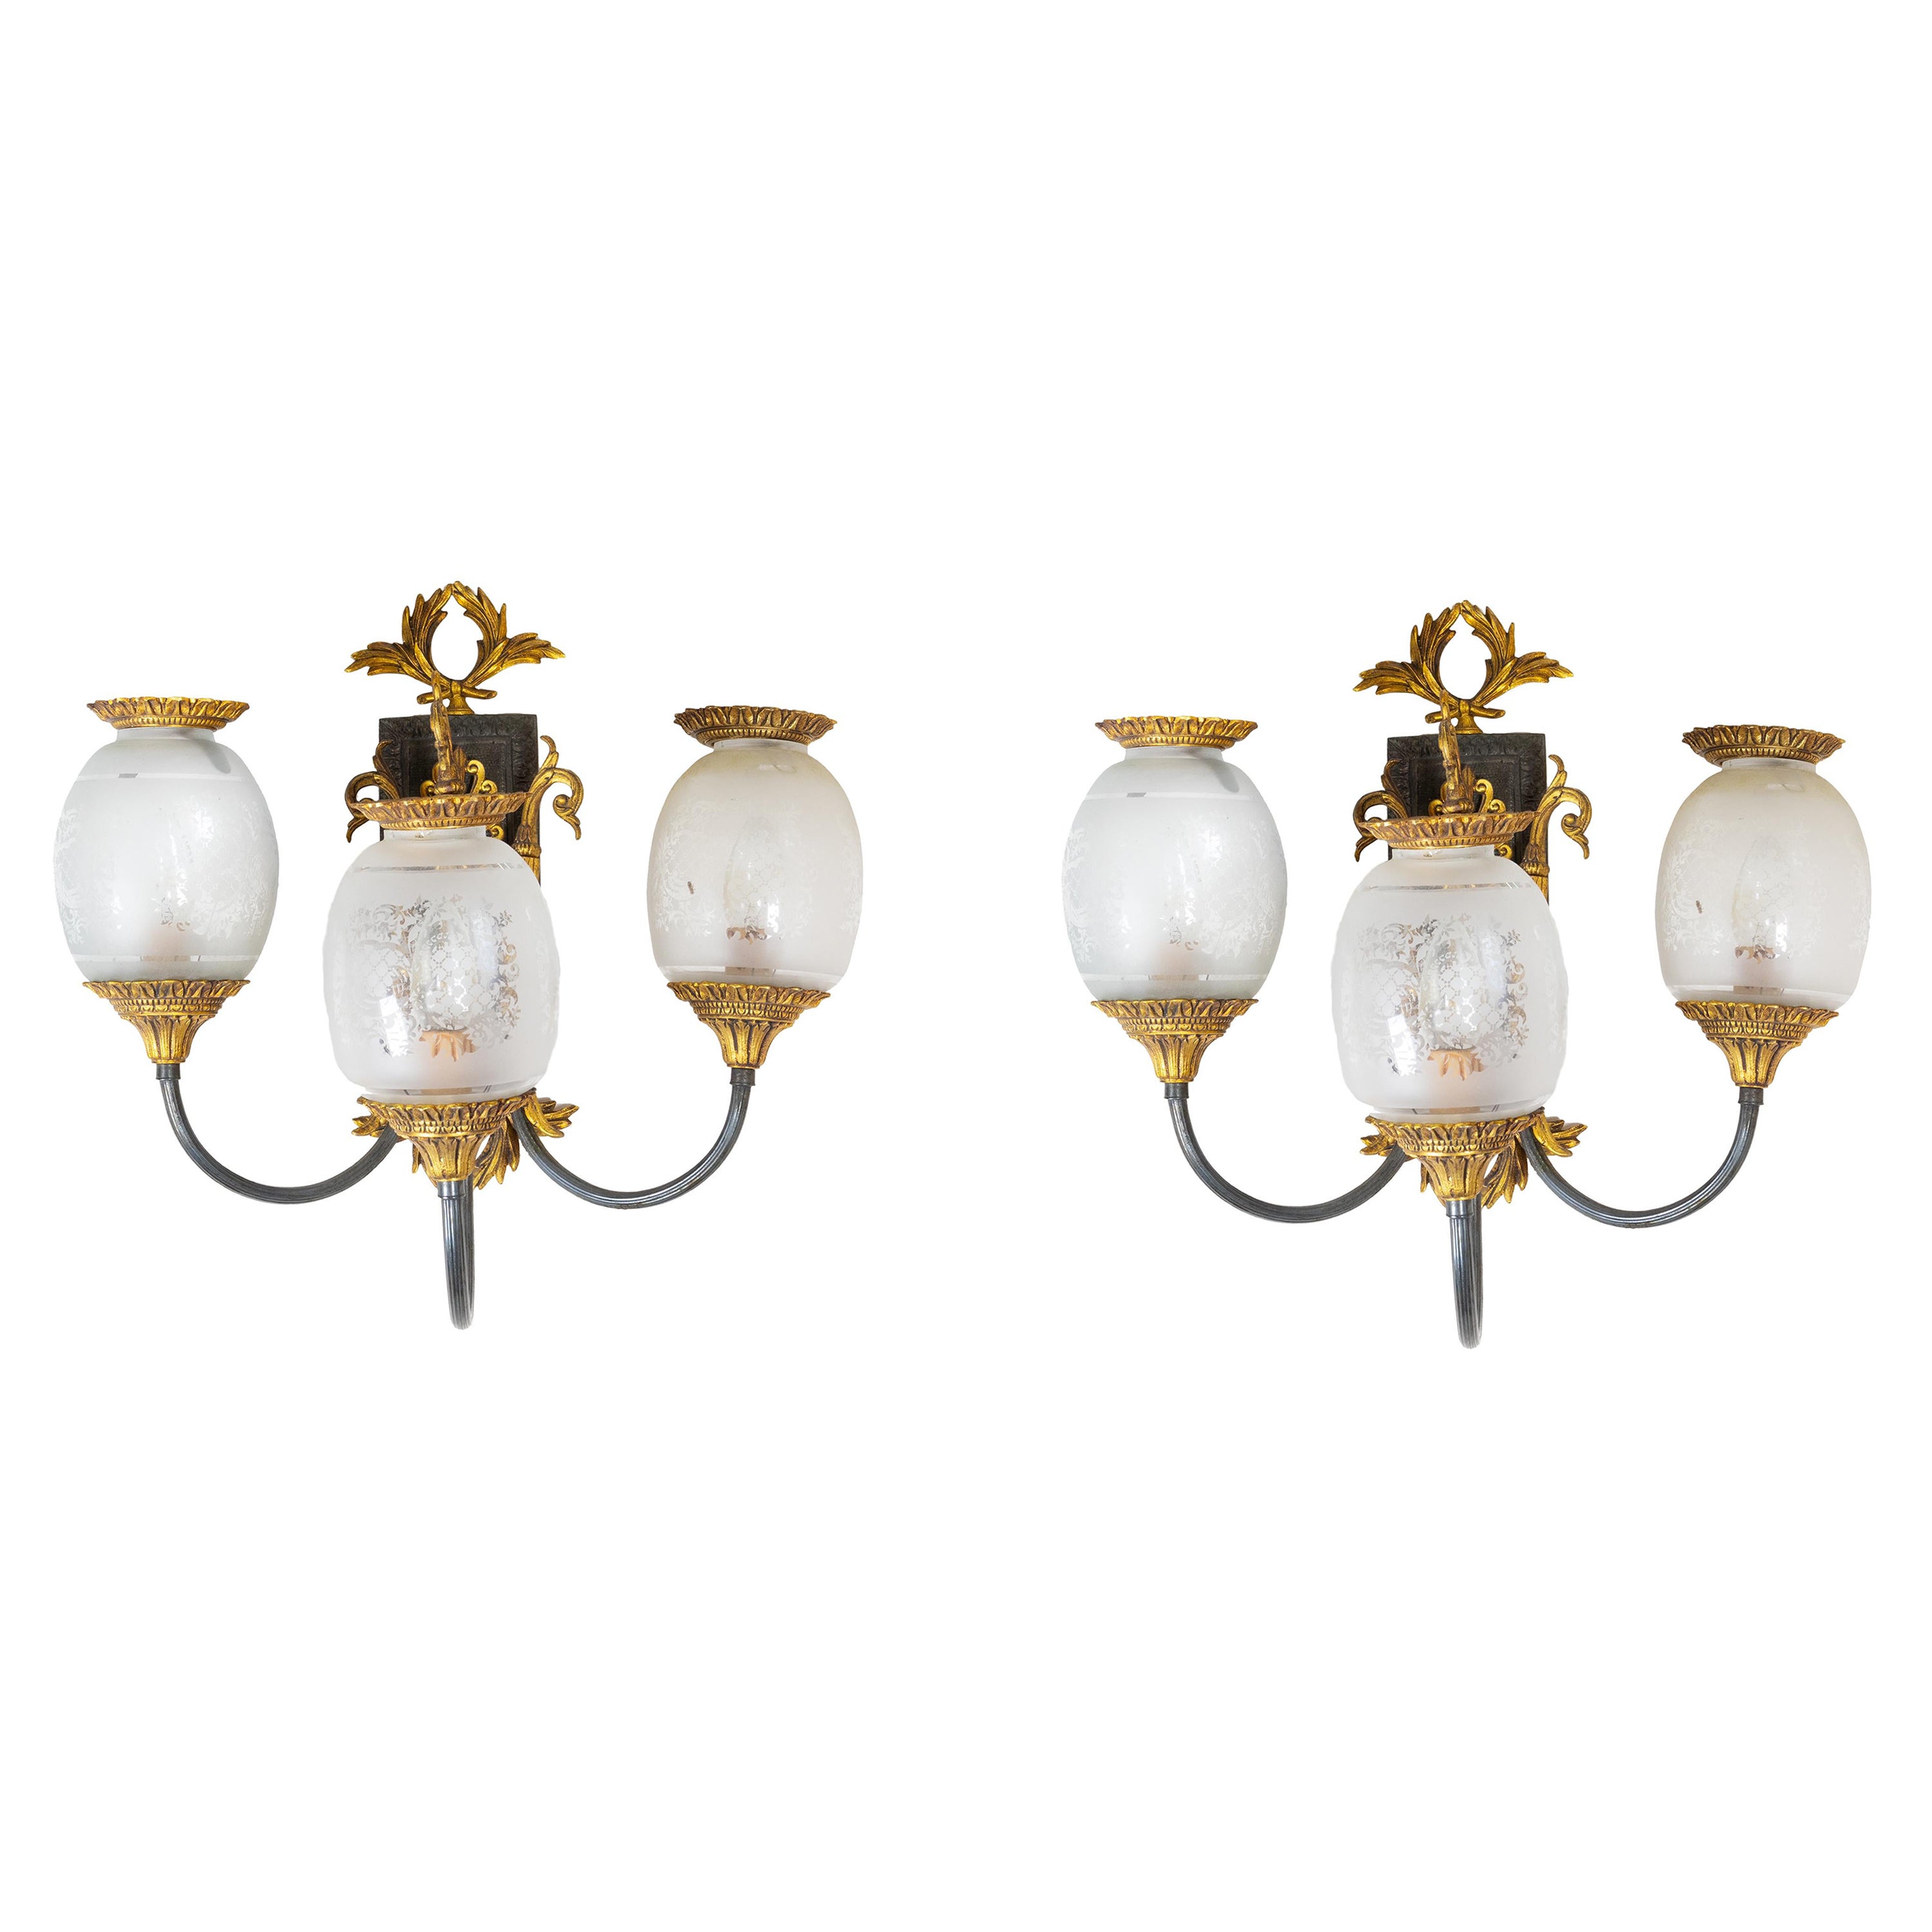 Three Lights Bronze Empire Inspired Modern Sconces, 20th Century For Sale